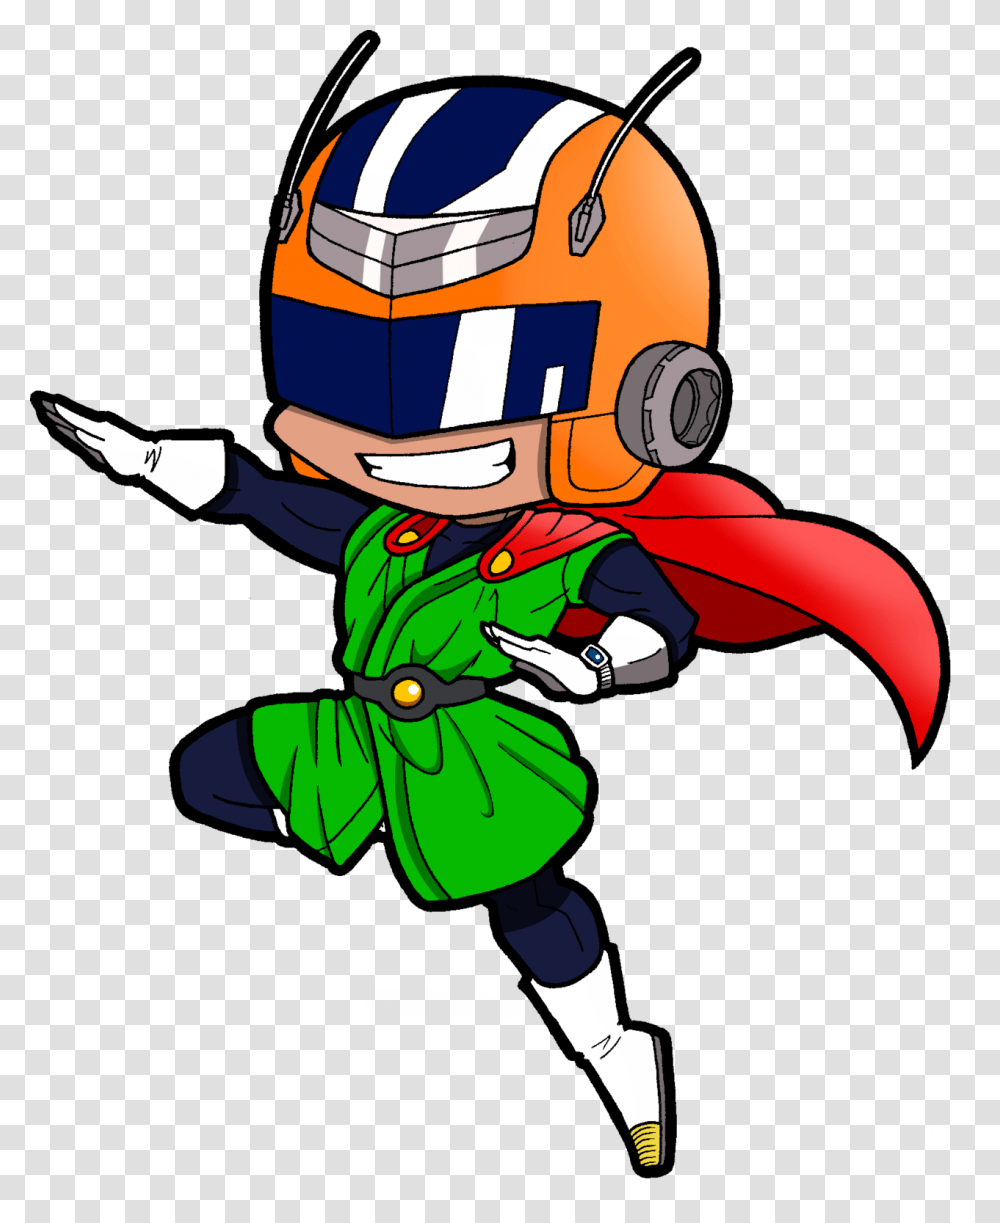 Gohan As The Great Saiyamanthis Is Labeled As My Cartoon, Apparel, Crash Helmet, Person Transparent Png